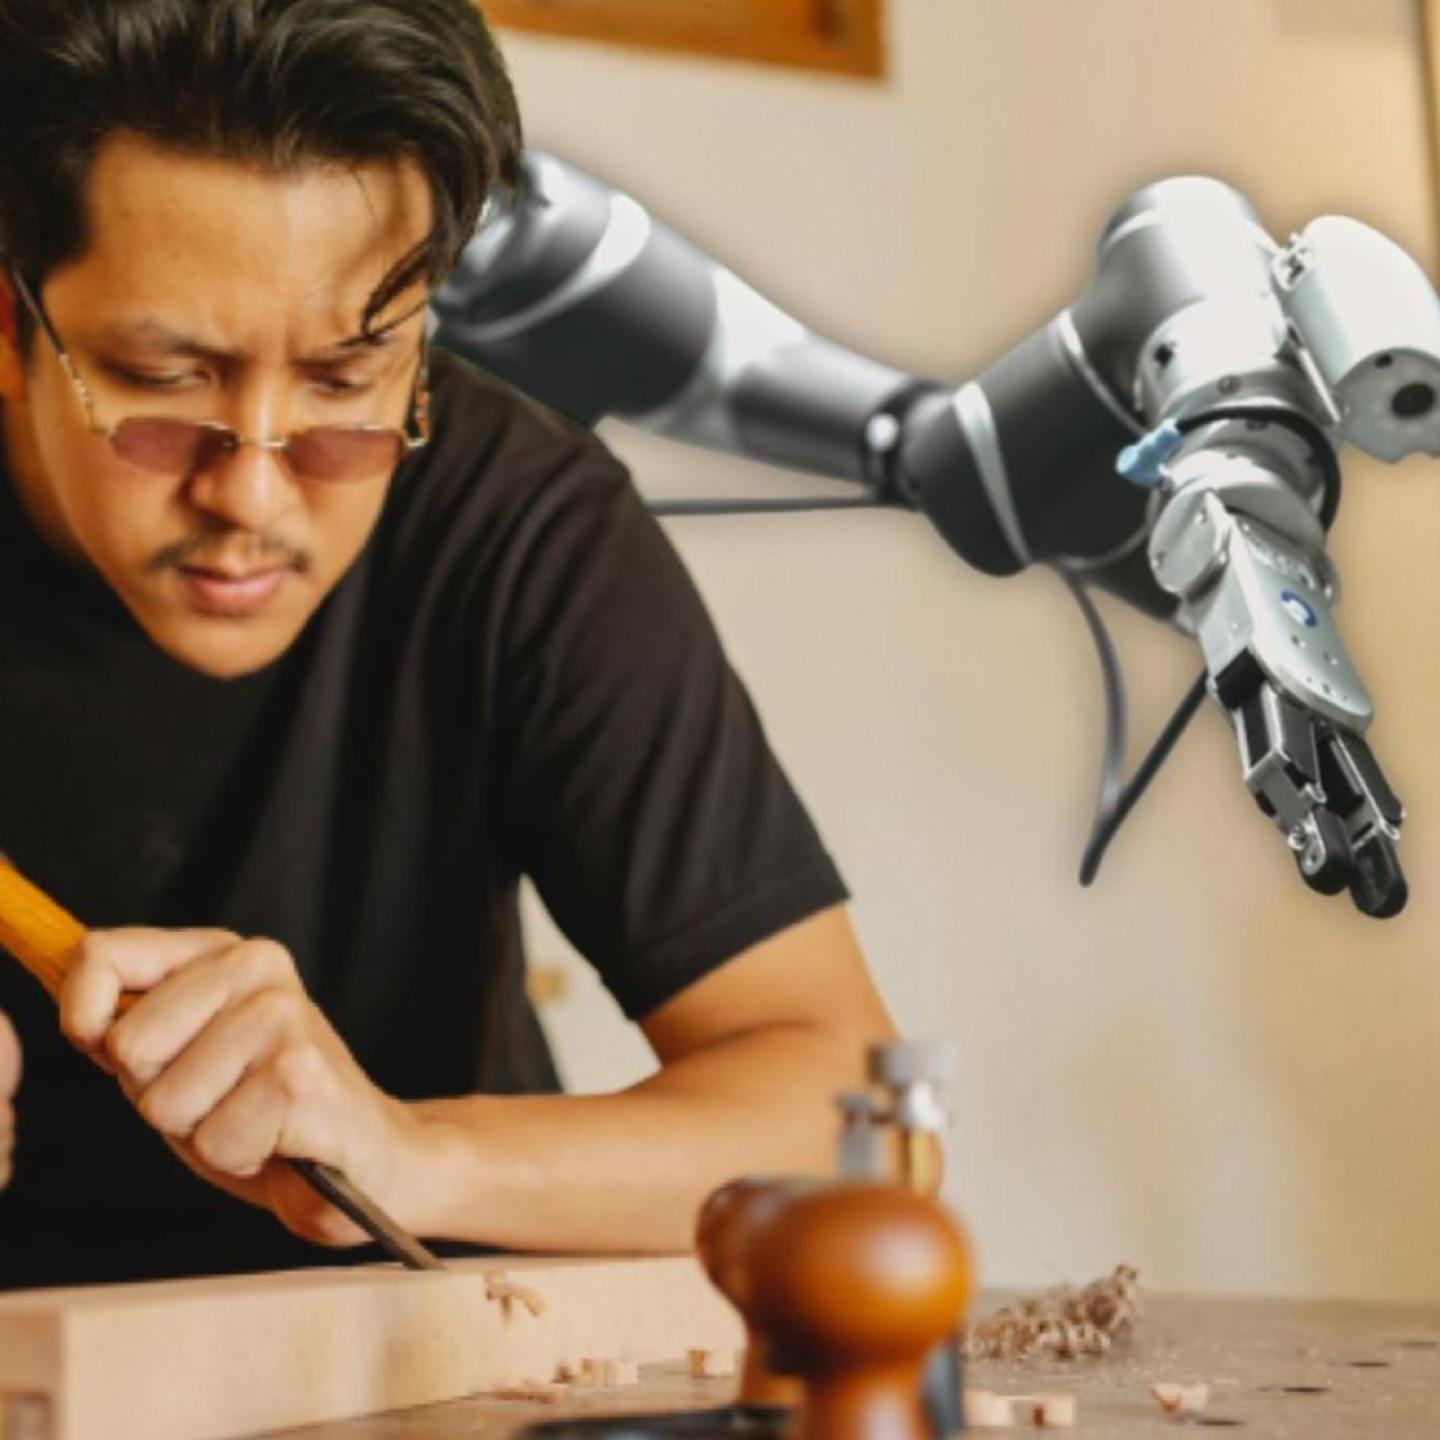 E273 - A Third (Robot) Arm Might be the Future of Human Augmentation